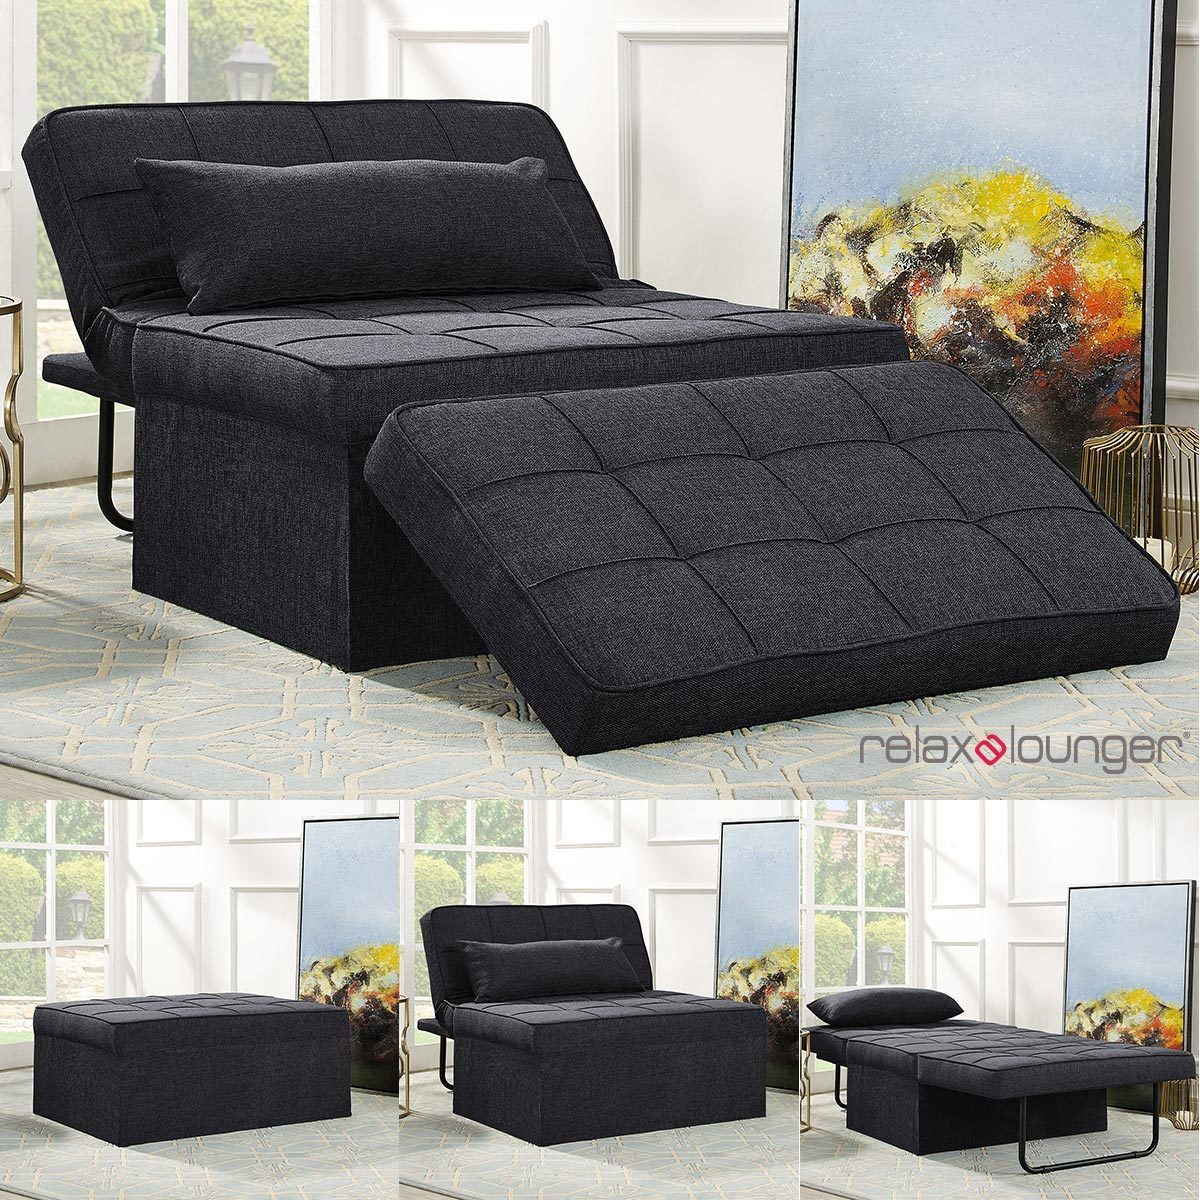 Ottoman Chair Sofa Bed Relaxer Grey Multi Functional Positional